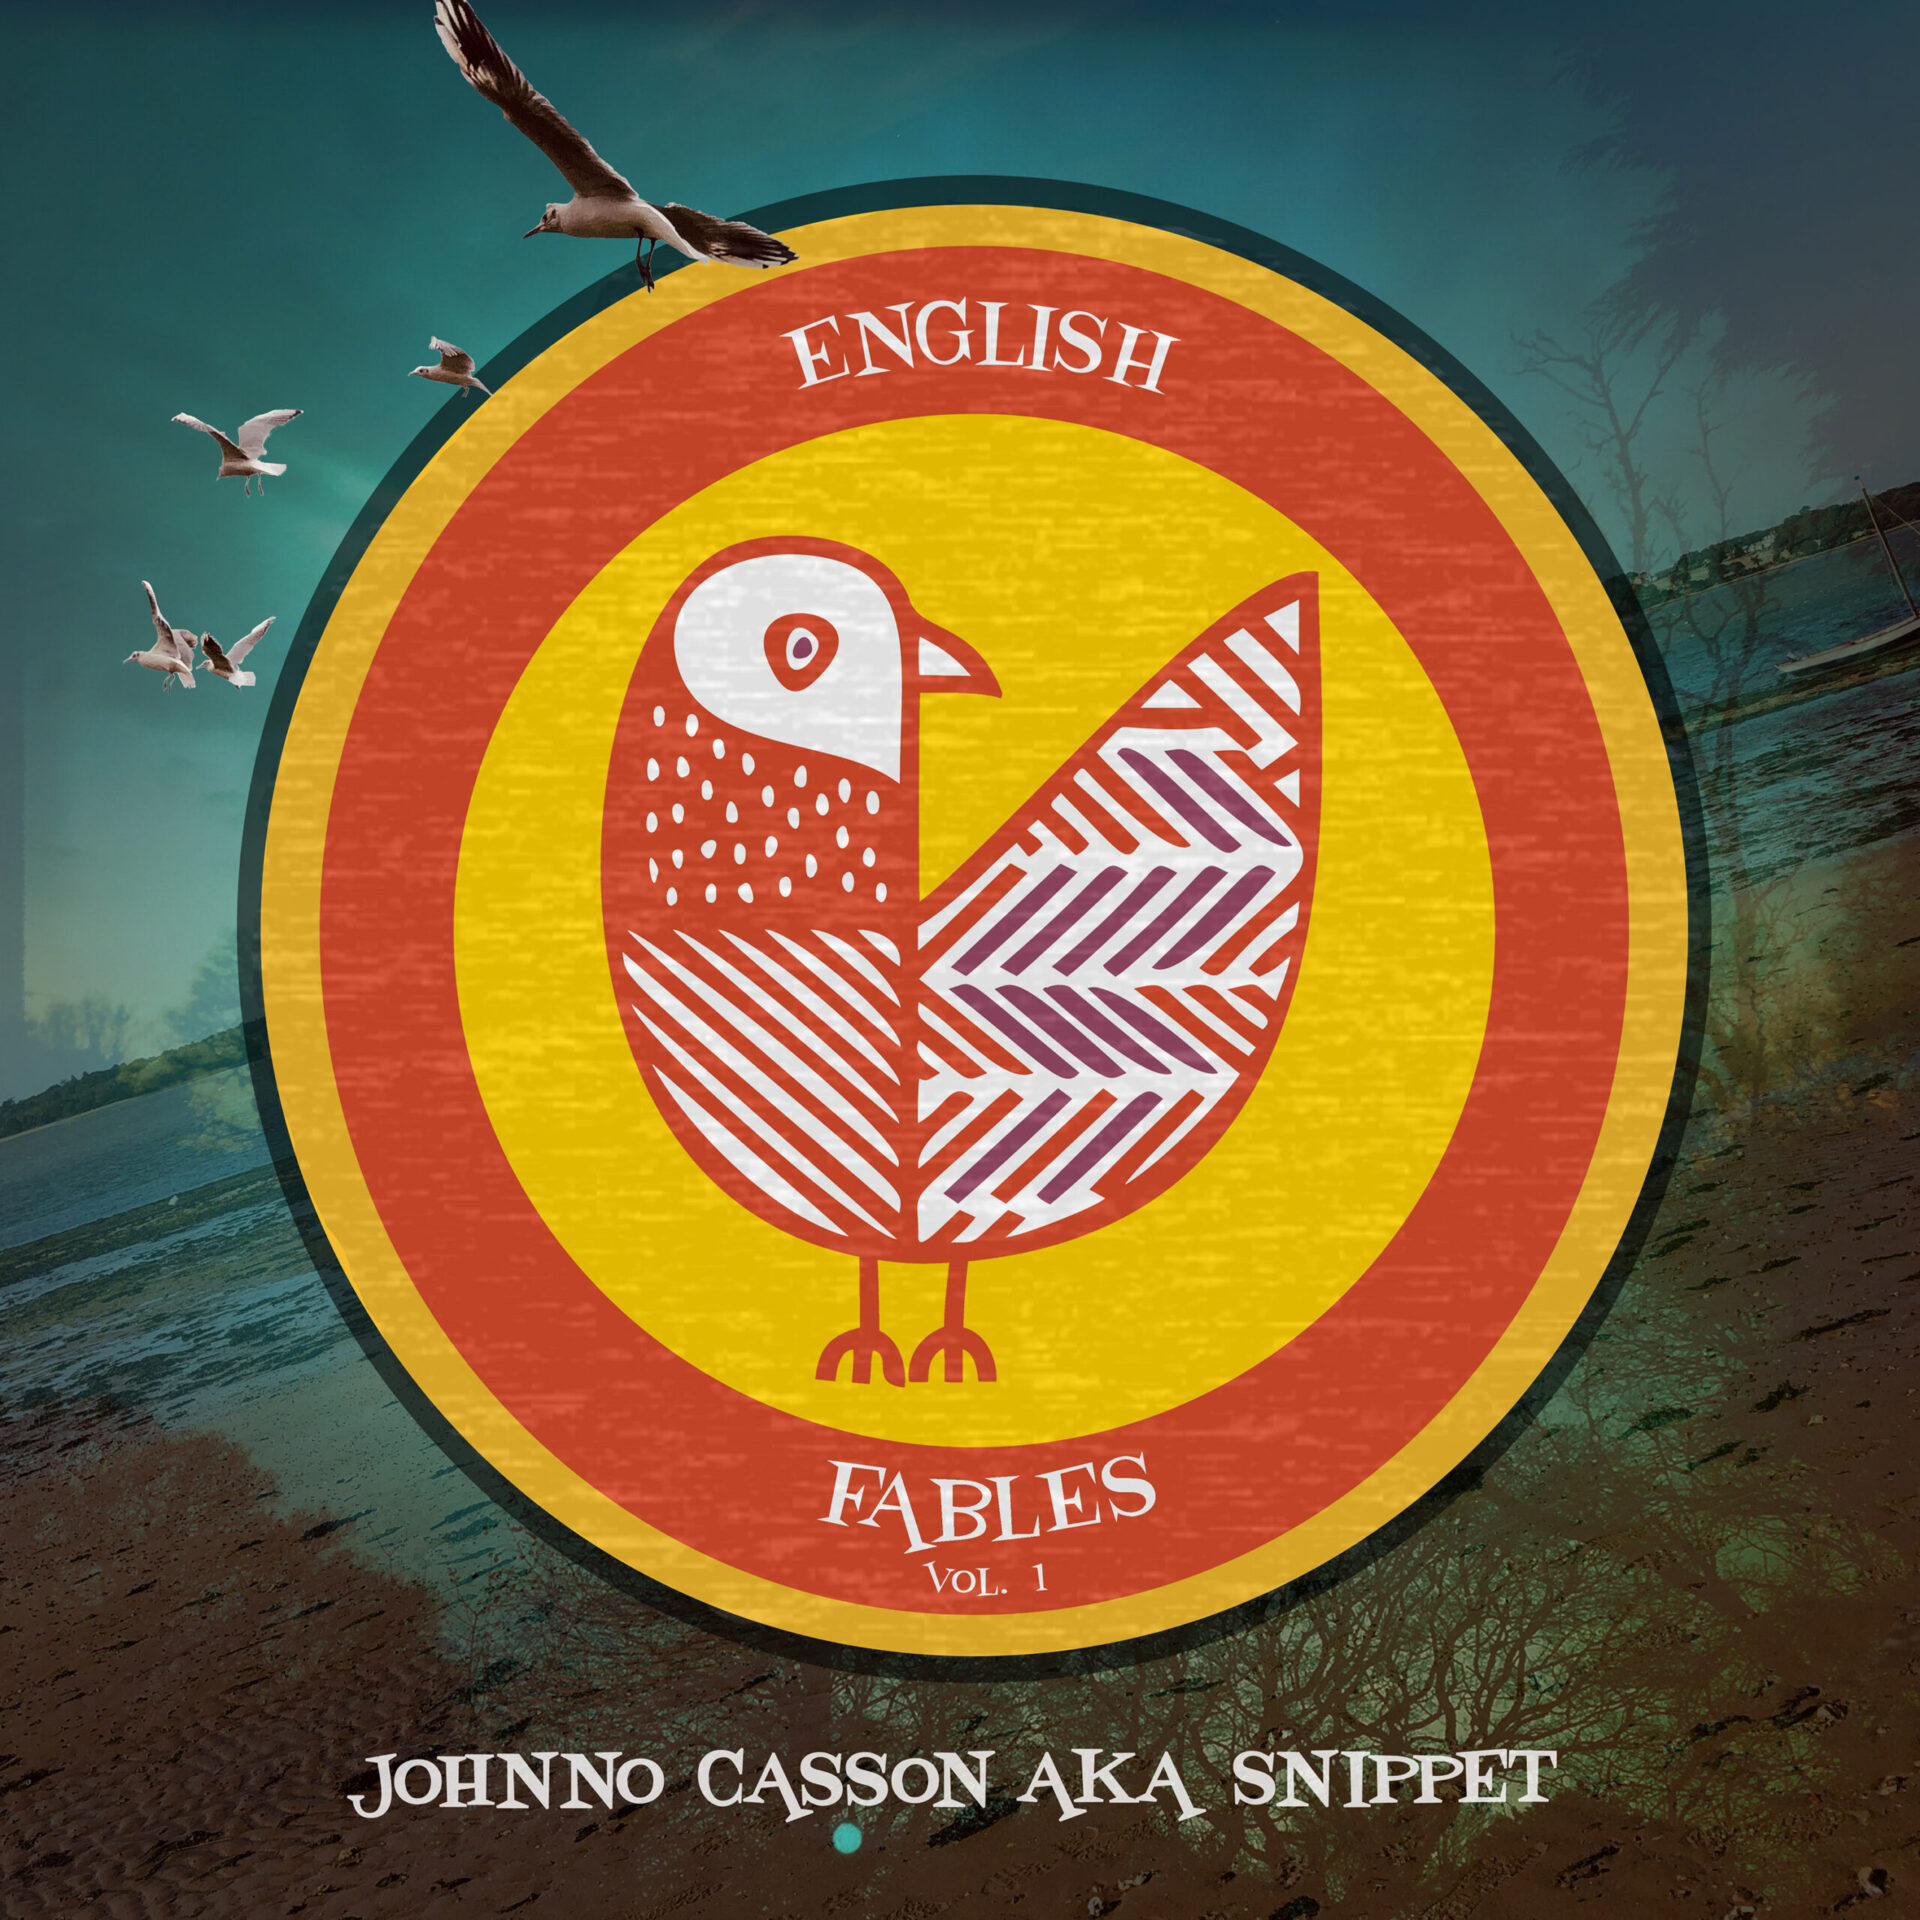 English Fables Vol.1 album by Johnno Casson aka Snippet cover art